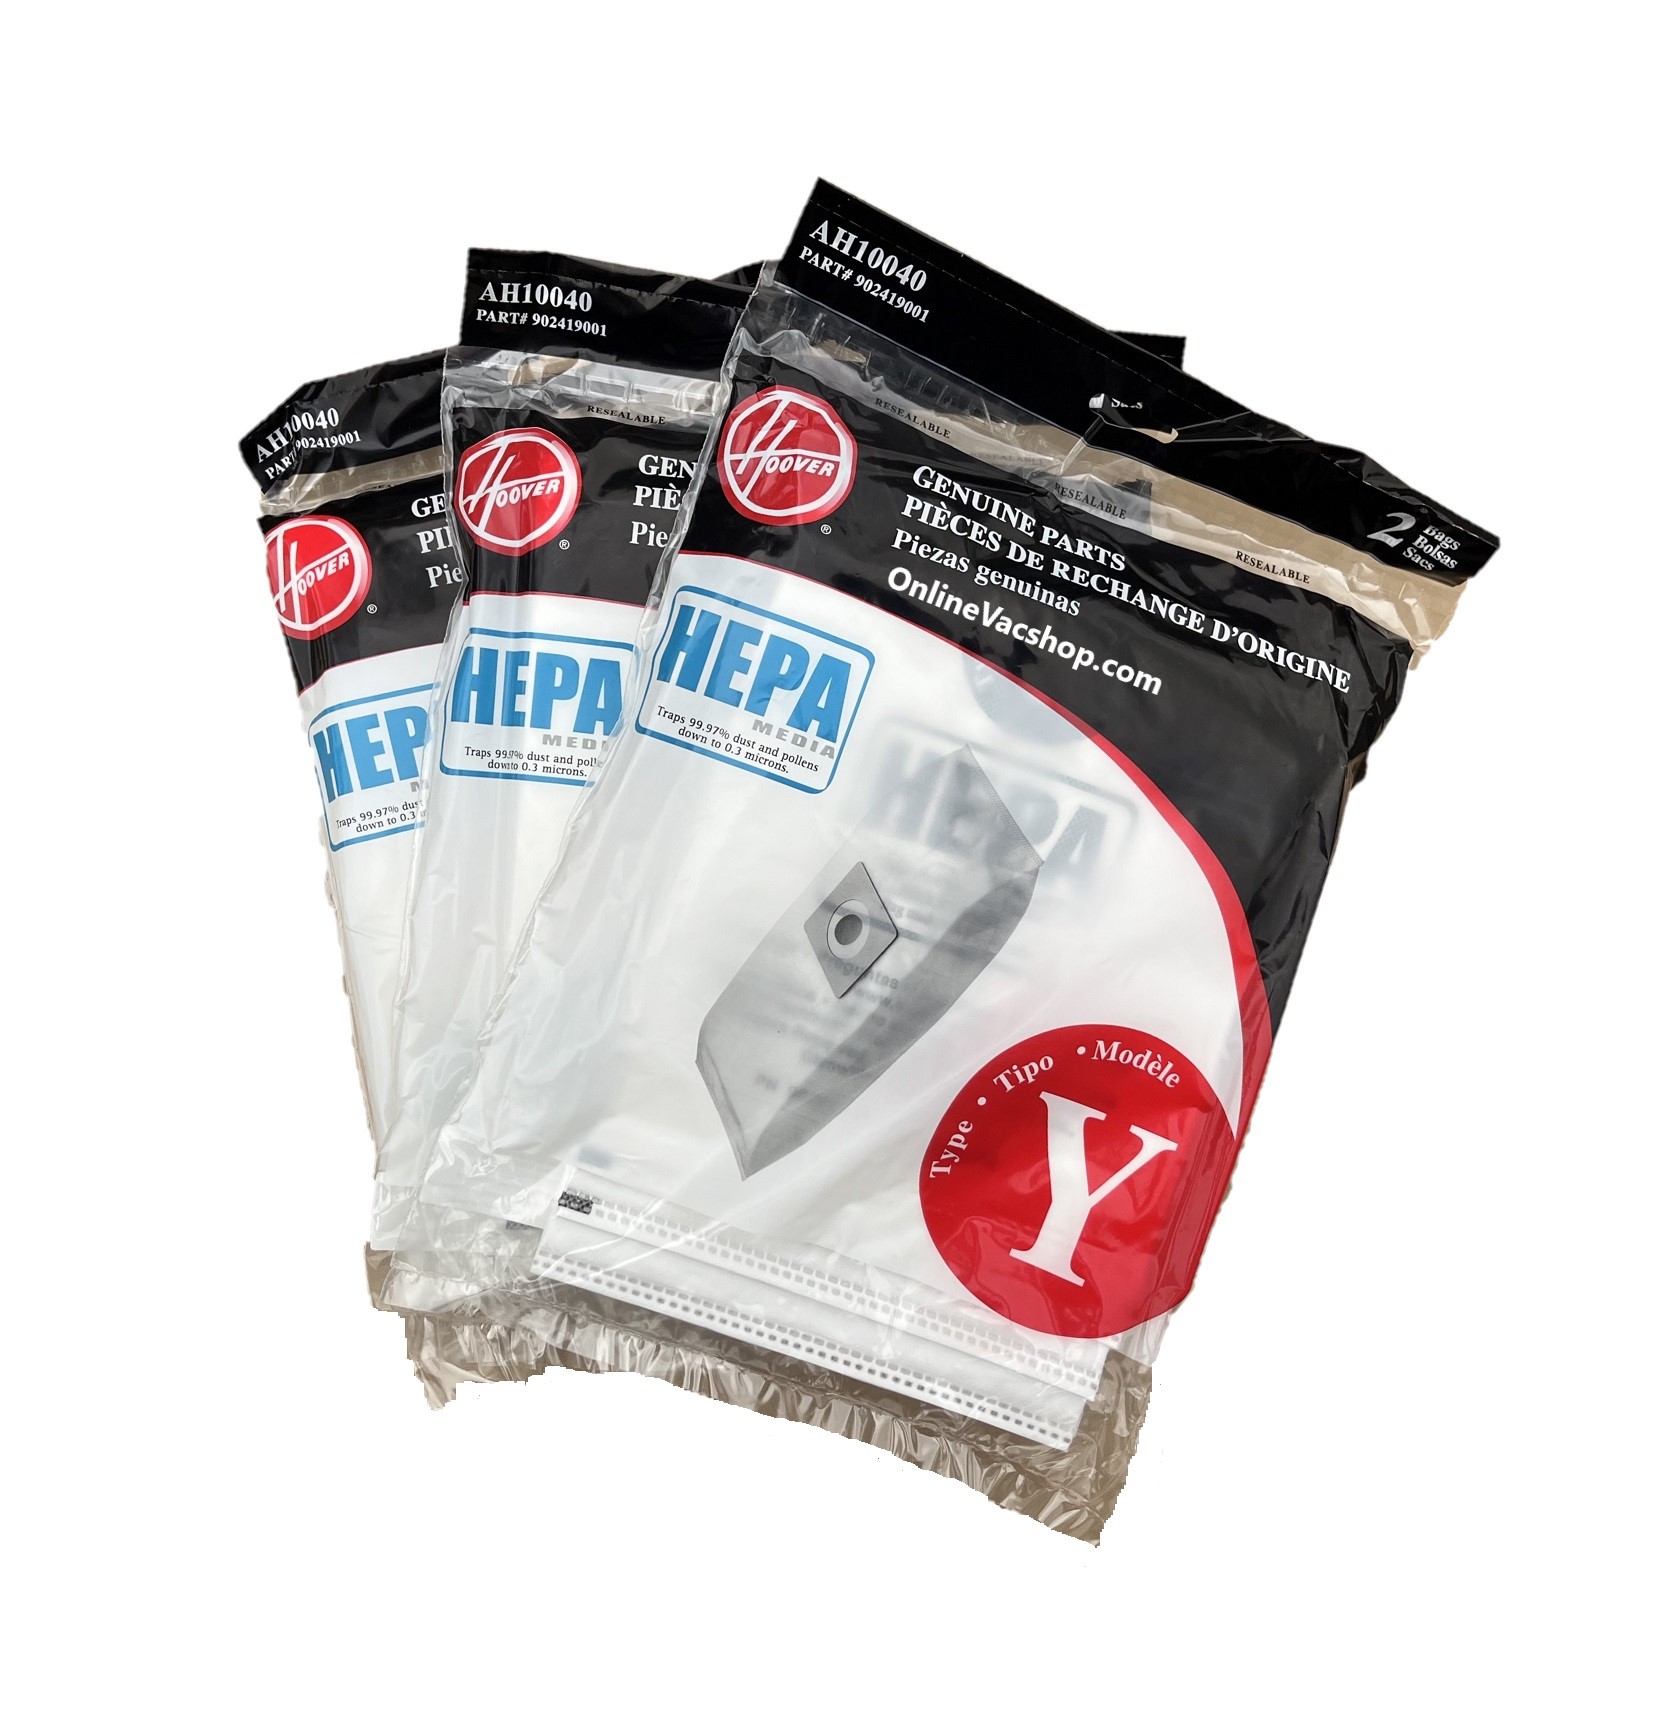 HOOVER Type A Filtration Bags for Select Hoover Upright Cleaners